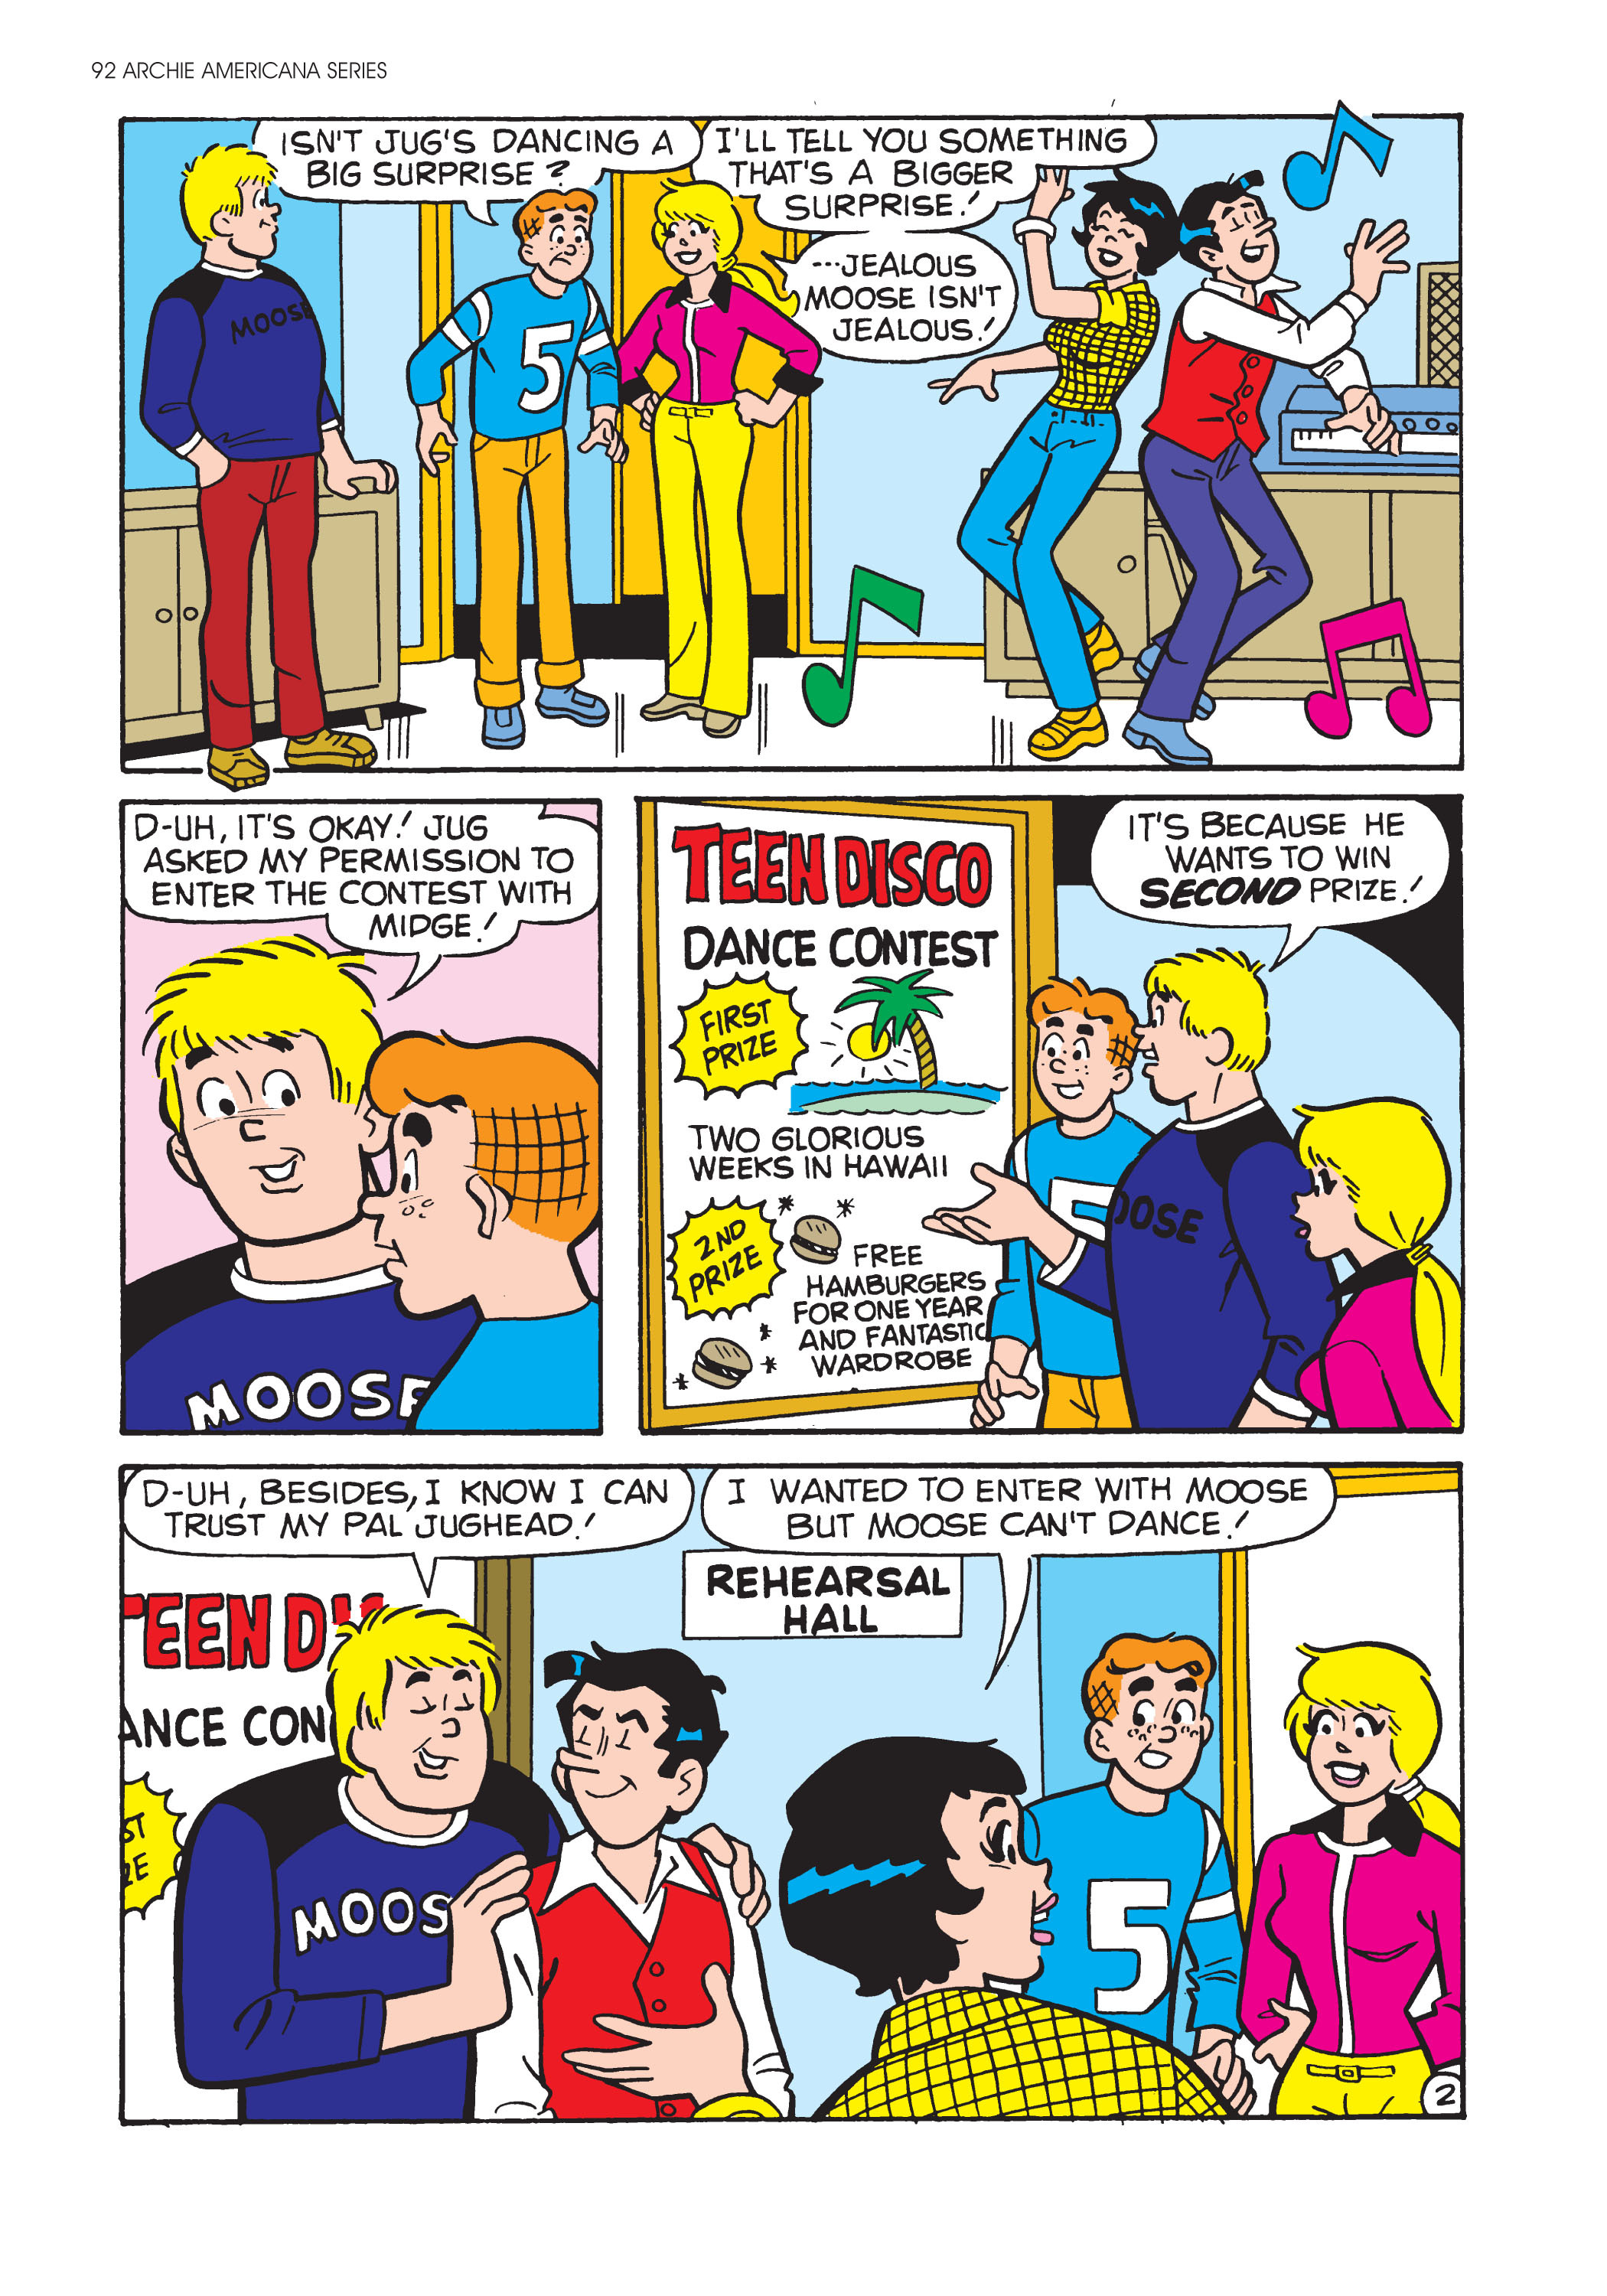 Read online Archie Americana Series comic -  Issue # TPB 4 - 94